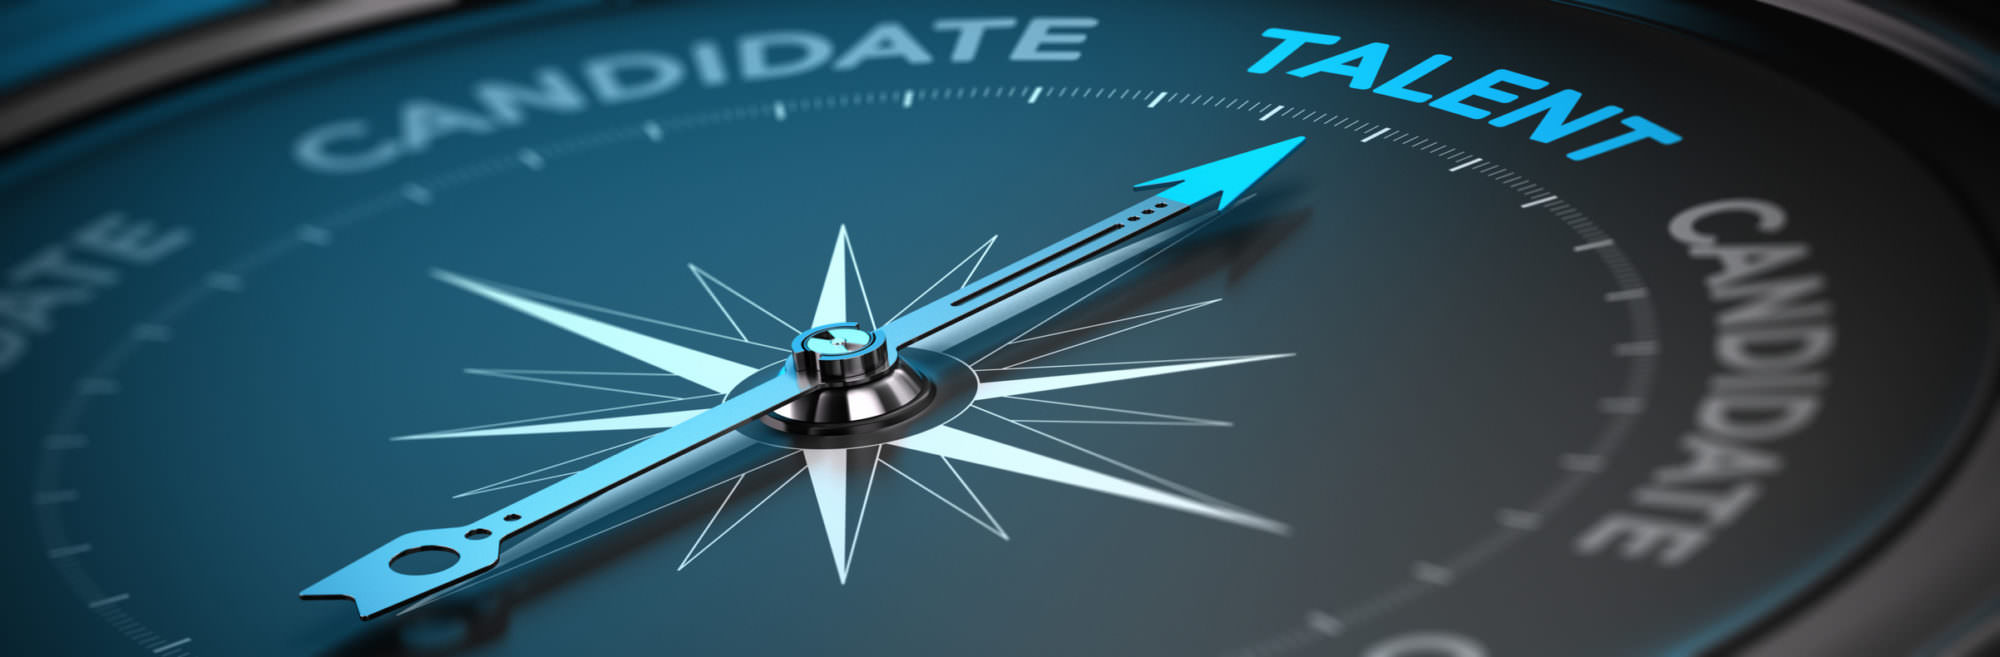 Image suitable for illustration of a recruitment agency or talent acquisition. Abstract compass